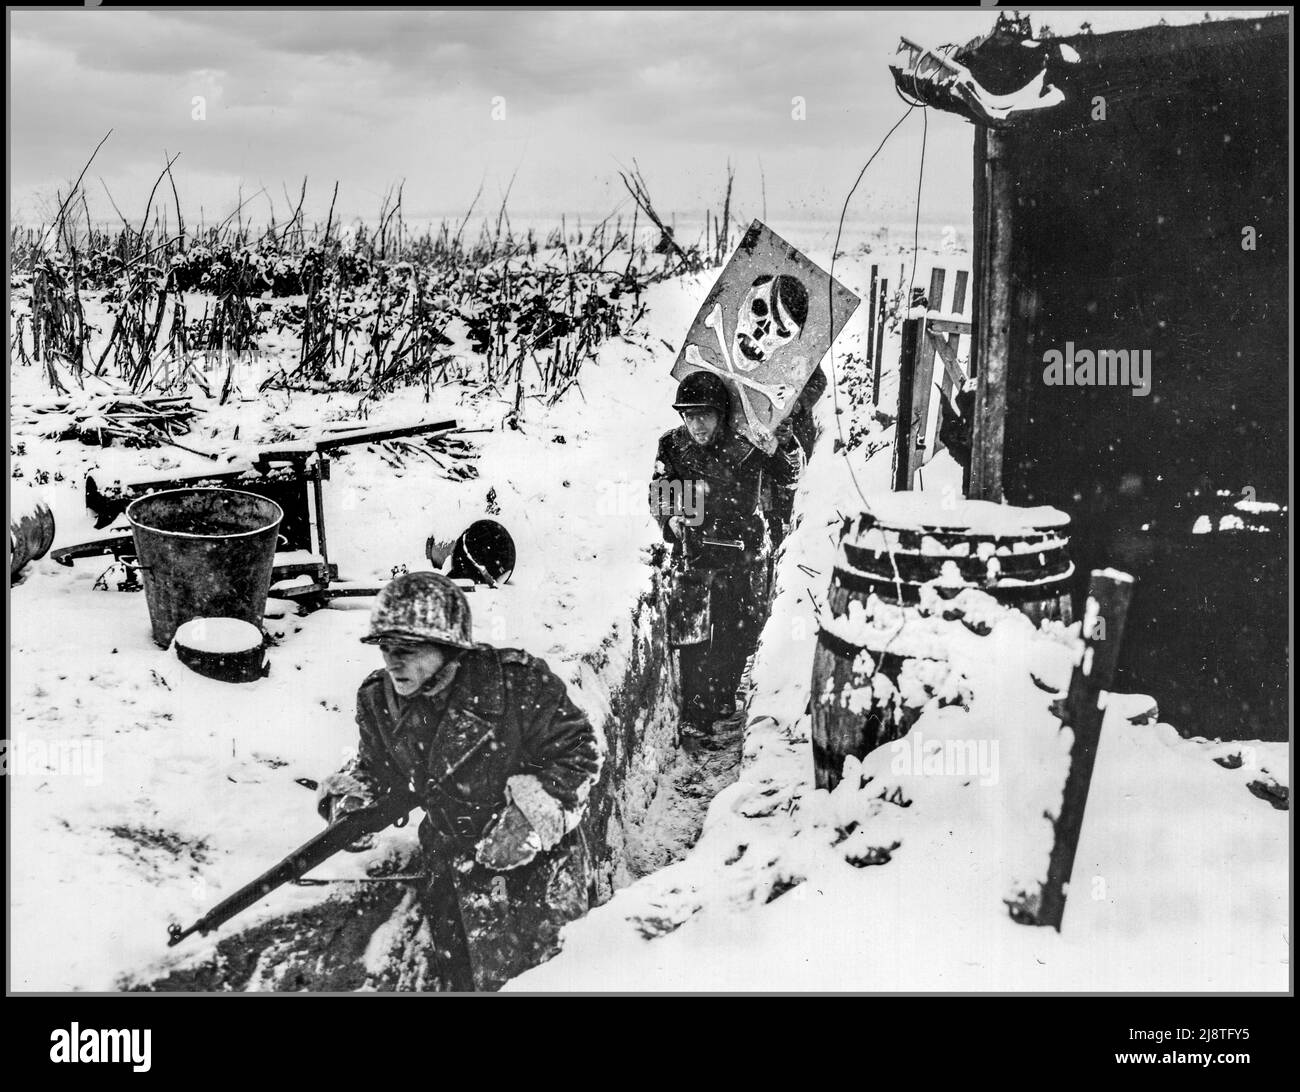 WW2 Rhine Germany 1945  Free French Infantry patrol of the 1st French Army carries a caricature poster of Hitler away from their snow covered winter Rhine river position. The trench humour placard was displayed on one bank of the river. Nazi German observers saw it with binoculars and furiously riddled the card with bullets.  5 Jan, 1945. Huningue, France. Photographer: Stubenrauch. Stock Photo